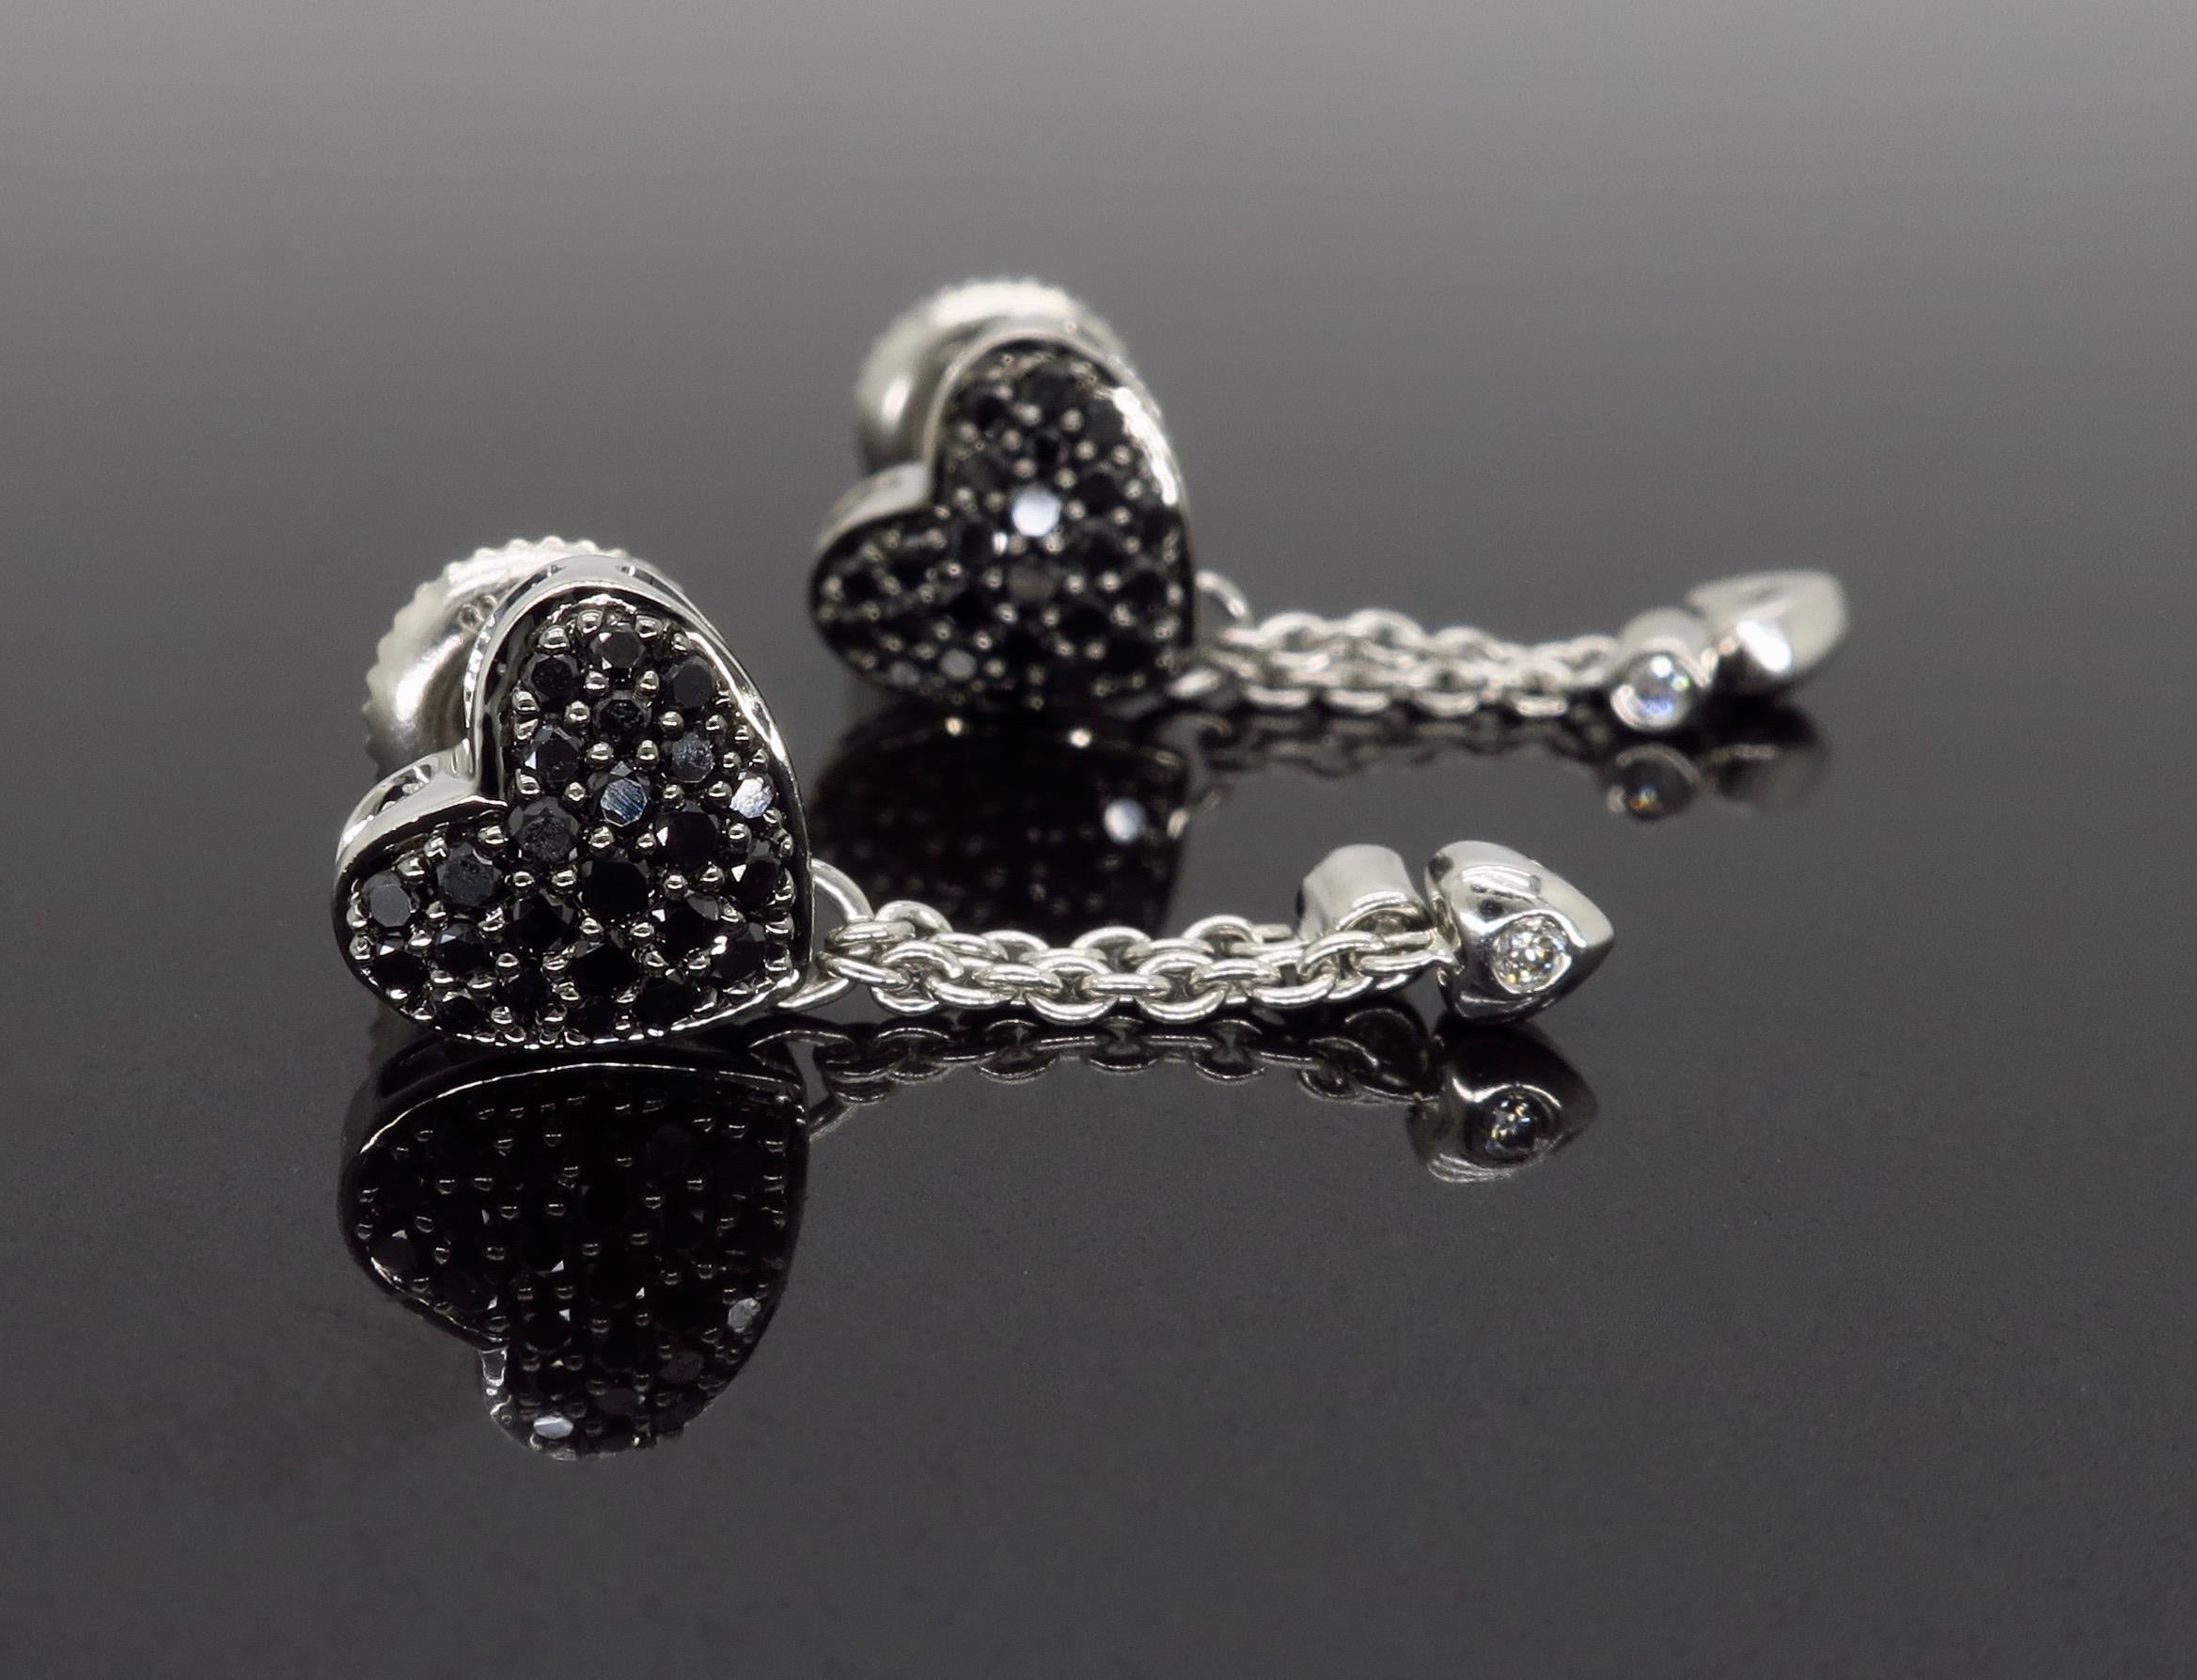 Heart shaped black and white diamond earrings crafted in 14K white gold.

Diamond Carat Weight: Approximately .24CTW 
Diamond Cut: Round Brilliant Diamonds
Color: Black Diamonds with 4 additional Round Brilliant Cut Diamonds with average H-J